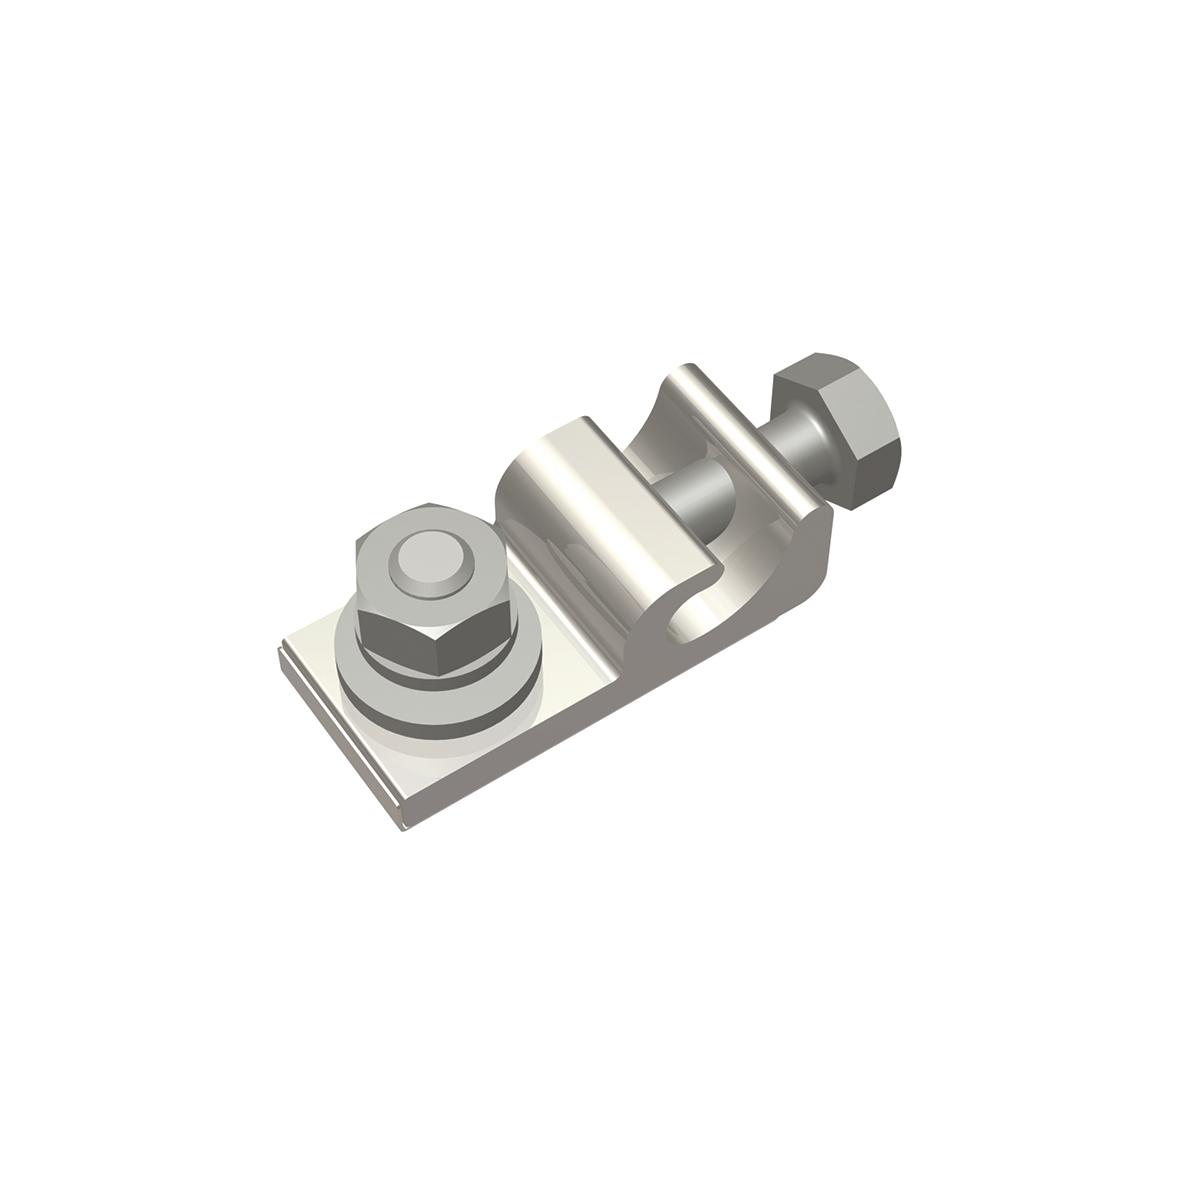 Hubbell WEEB-LUG-6.7AS Lay-in lug assembly - 100 per box, 1 assy incl (1), Tin Plated Copper Lug (1) 1/4-28 hex screw, (1) 1/4-20 x 3/4 hex screw. 